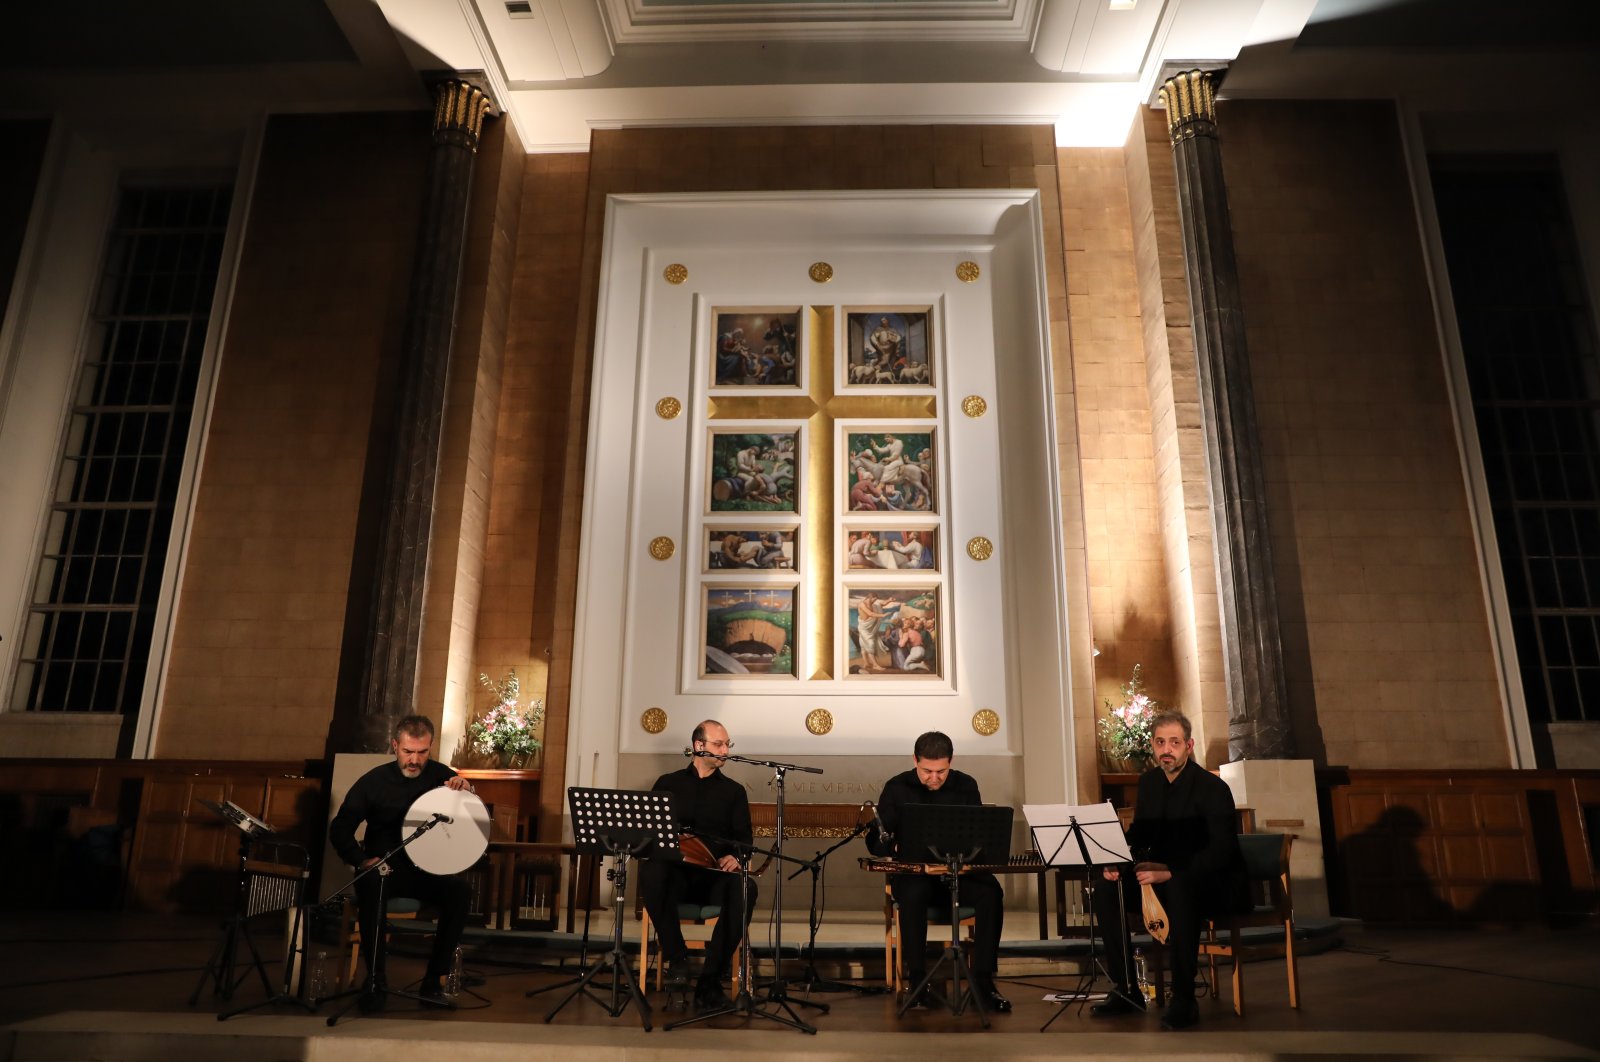 The ensemble for the evening boasted a lineup of exceptionally talented musicians with Baha Yetkin on oud and vocals, Serdar Yılmaz on qanun, Alexandros Koustas on classical kemenche and Muammer Sağlam on percussion, London, U.K., Jan. 24, 2024. (Photo courtesy of YEE London)